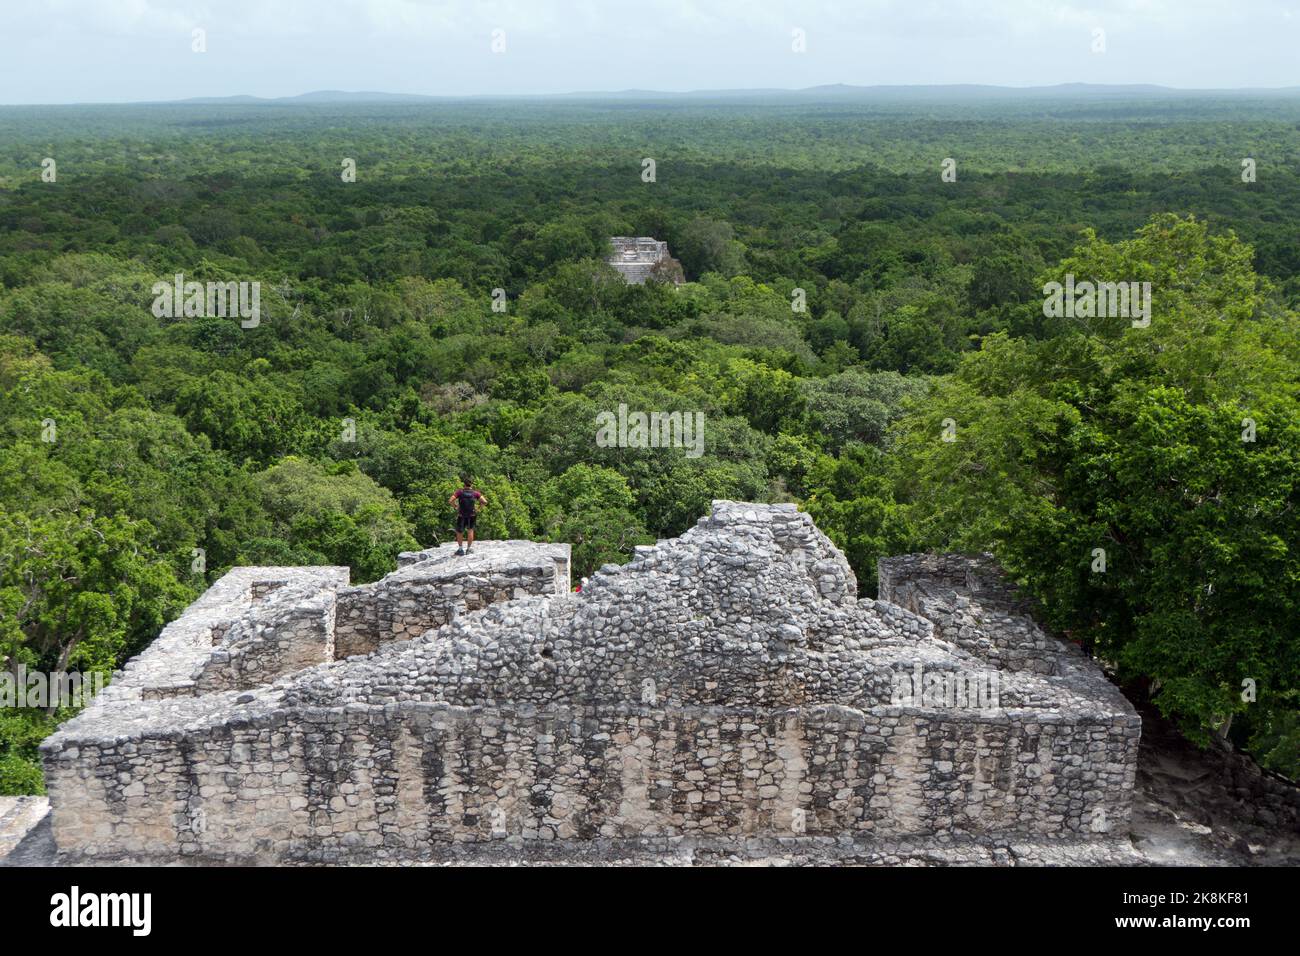 Man at Calakmul, a Maya archaeological site deep in the rainforest of the Mexican state of Campeche. View from the pyramid known as Structure 2 Stock Photo